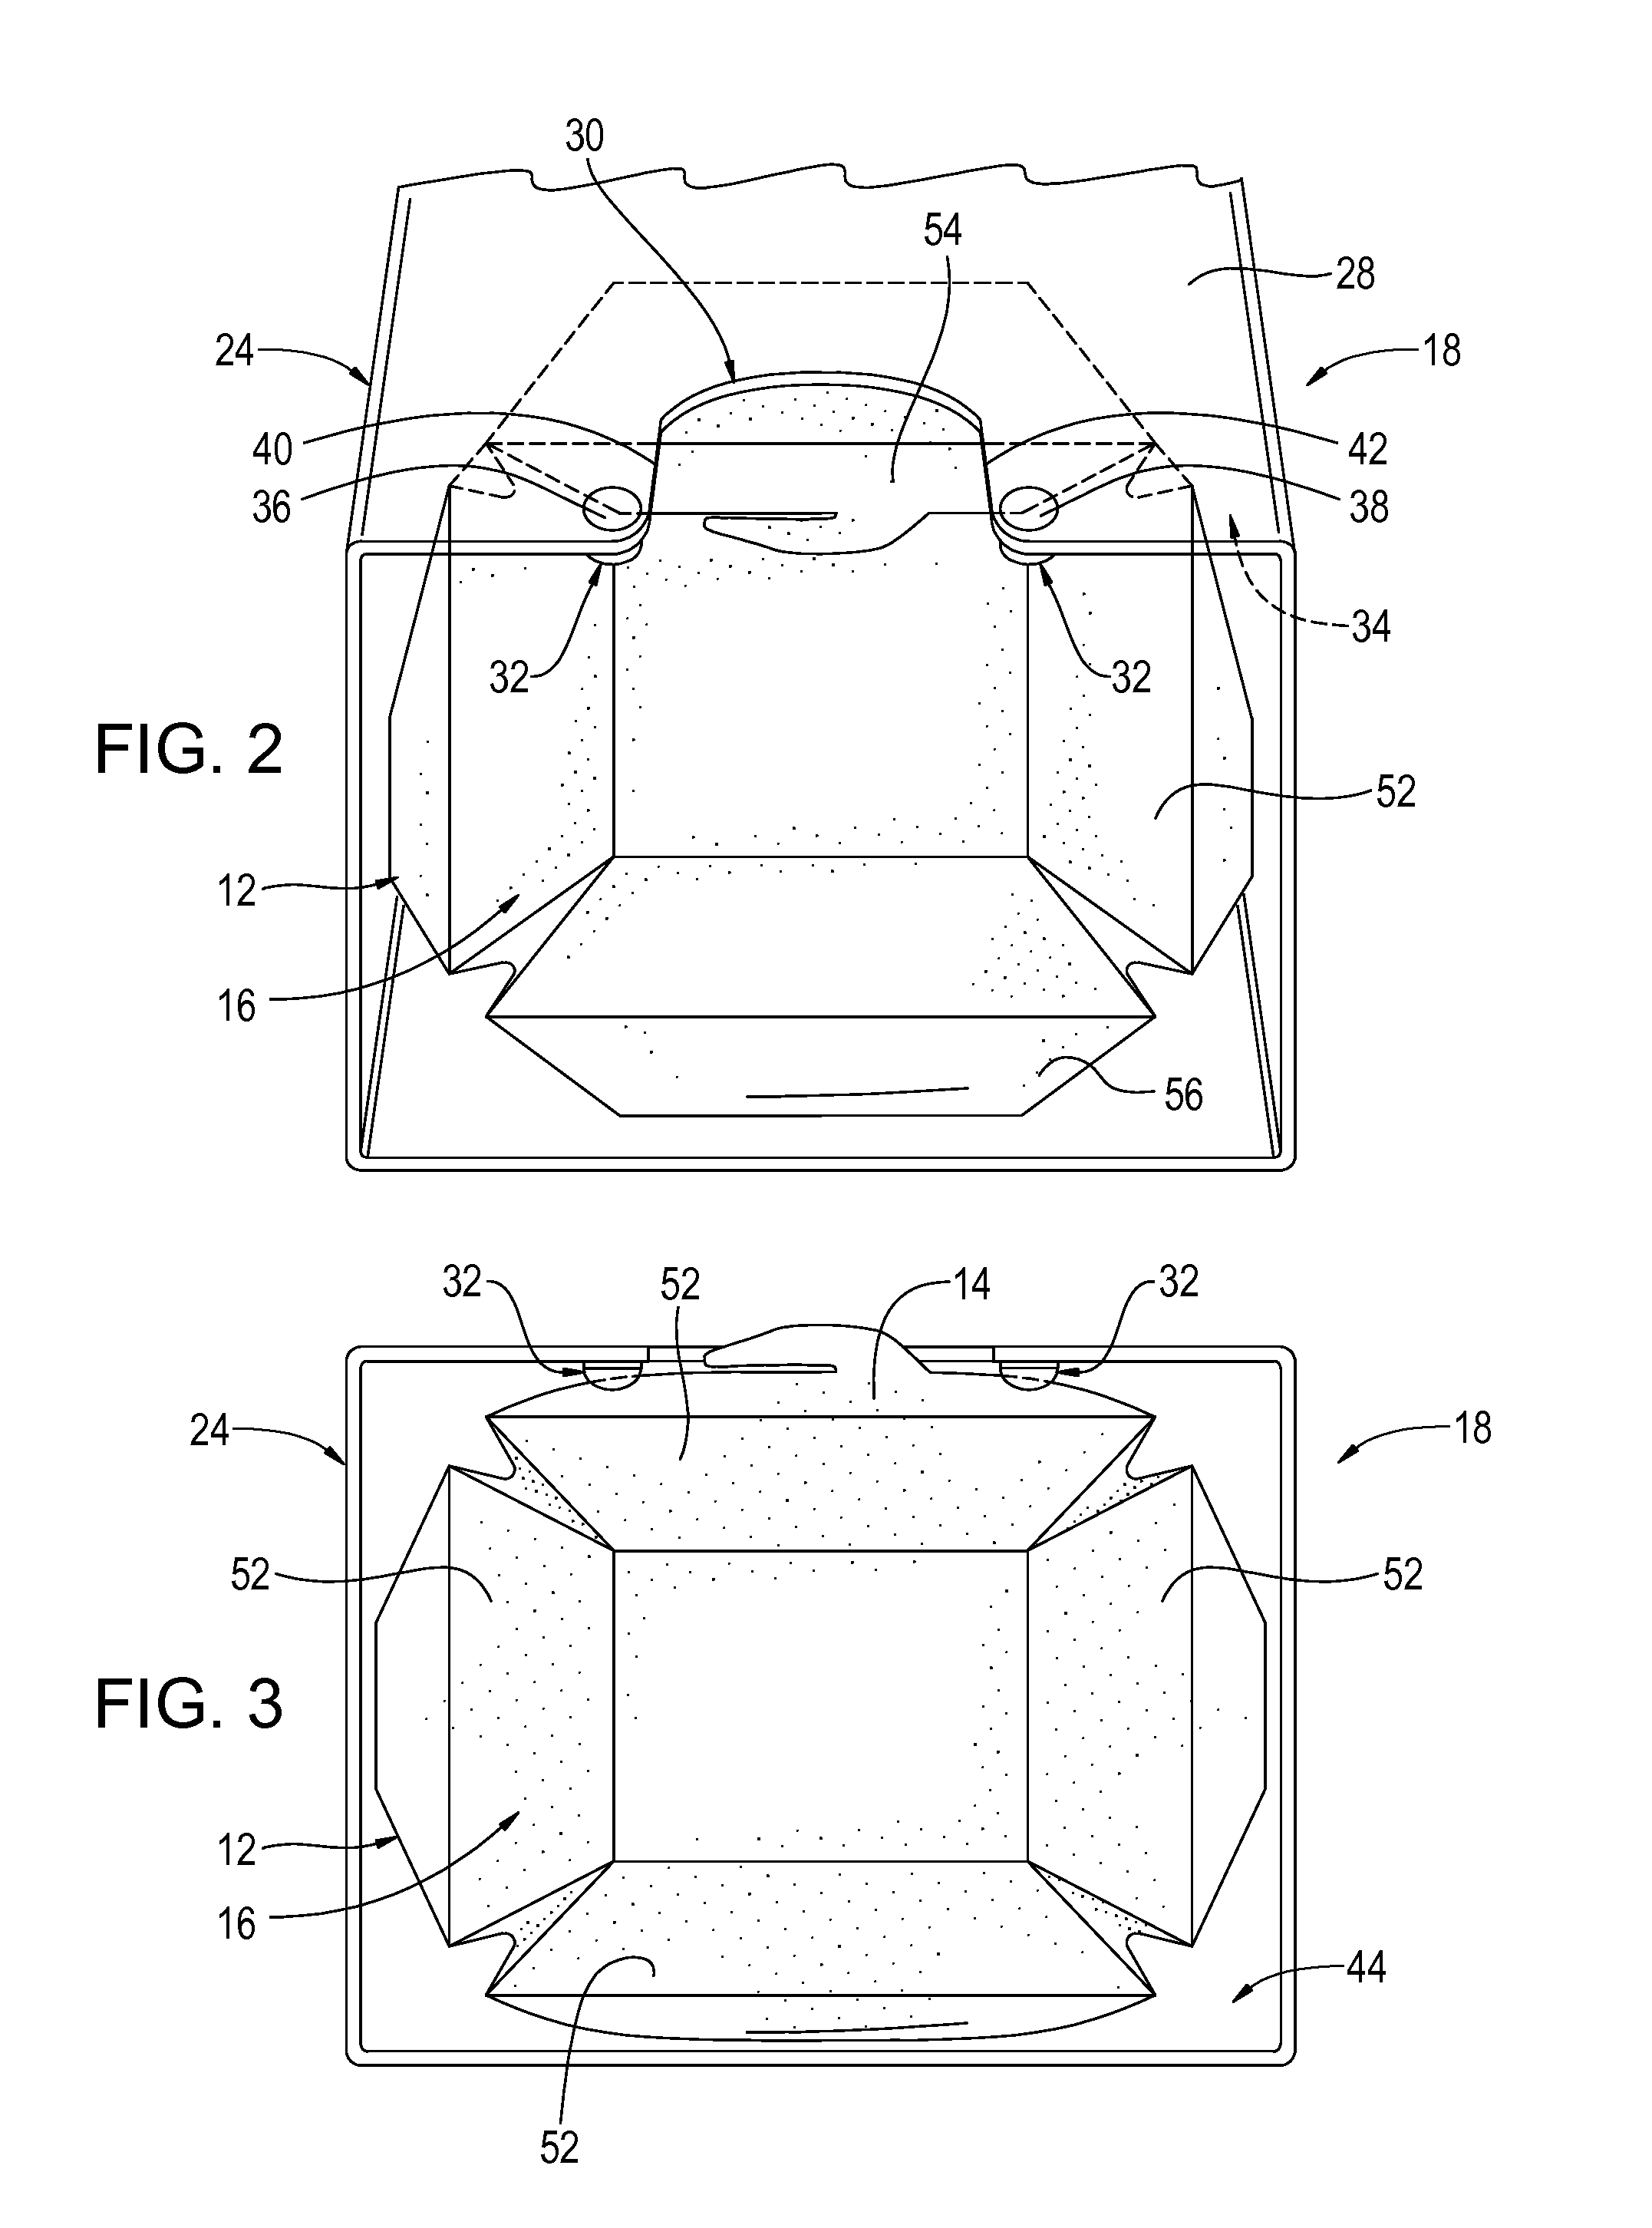 Apparatus for Dispensing Stackable Box Food Containers